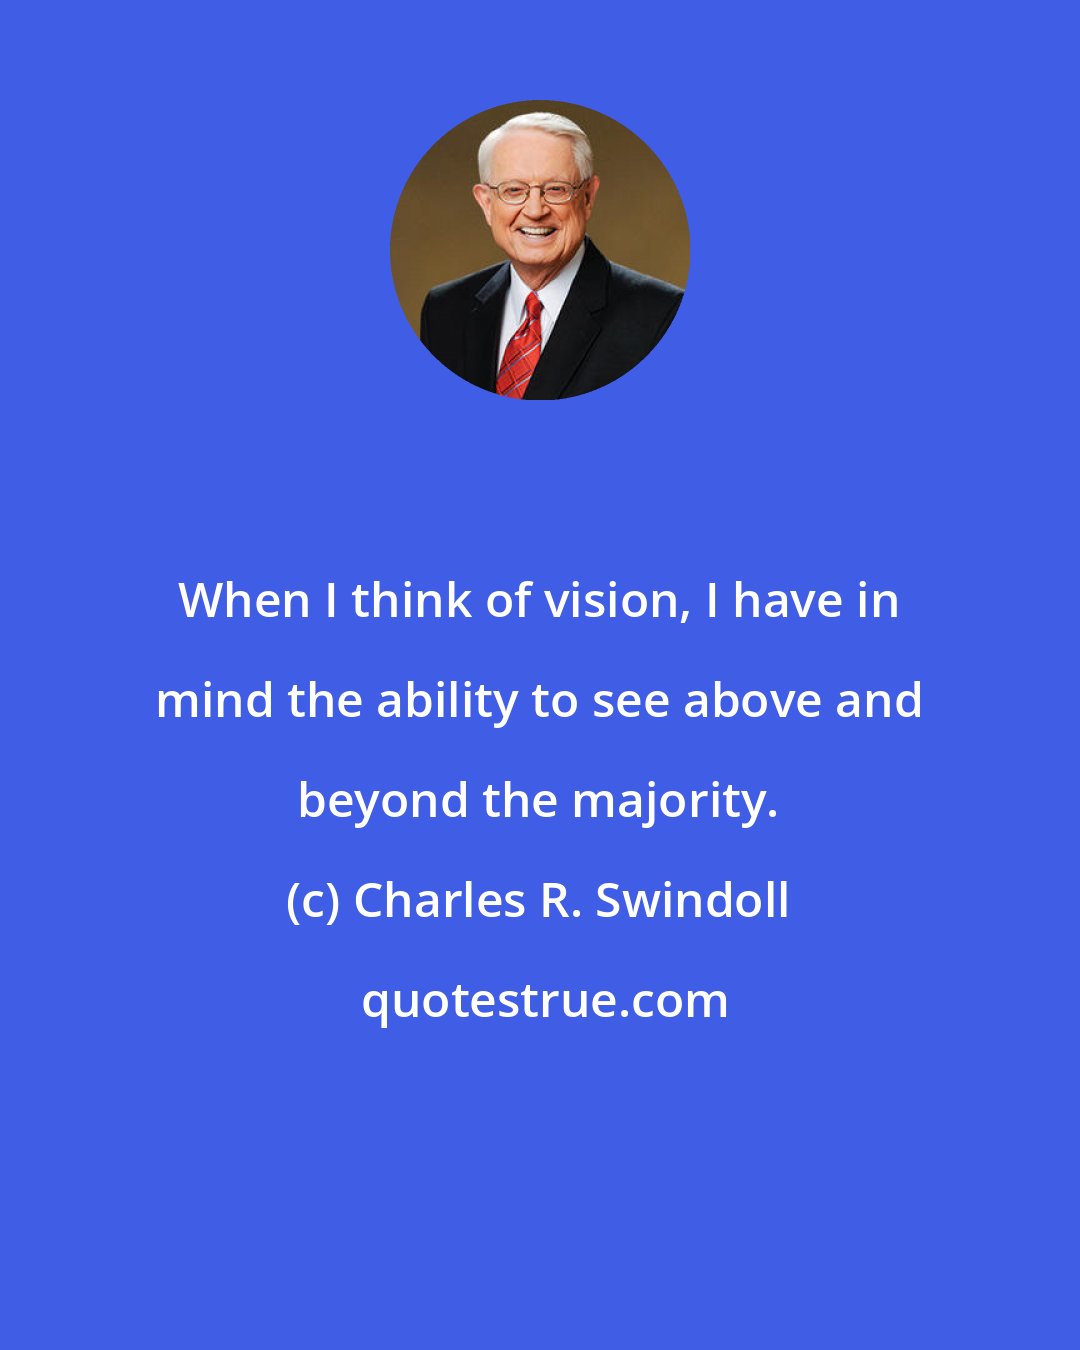 Charles R. Swindoll: When I think of vision, I have in mind the ability to see above and beyond the majority.